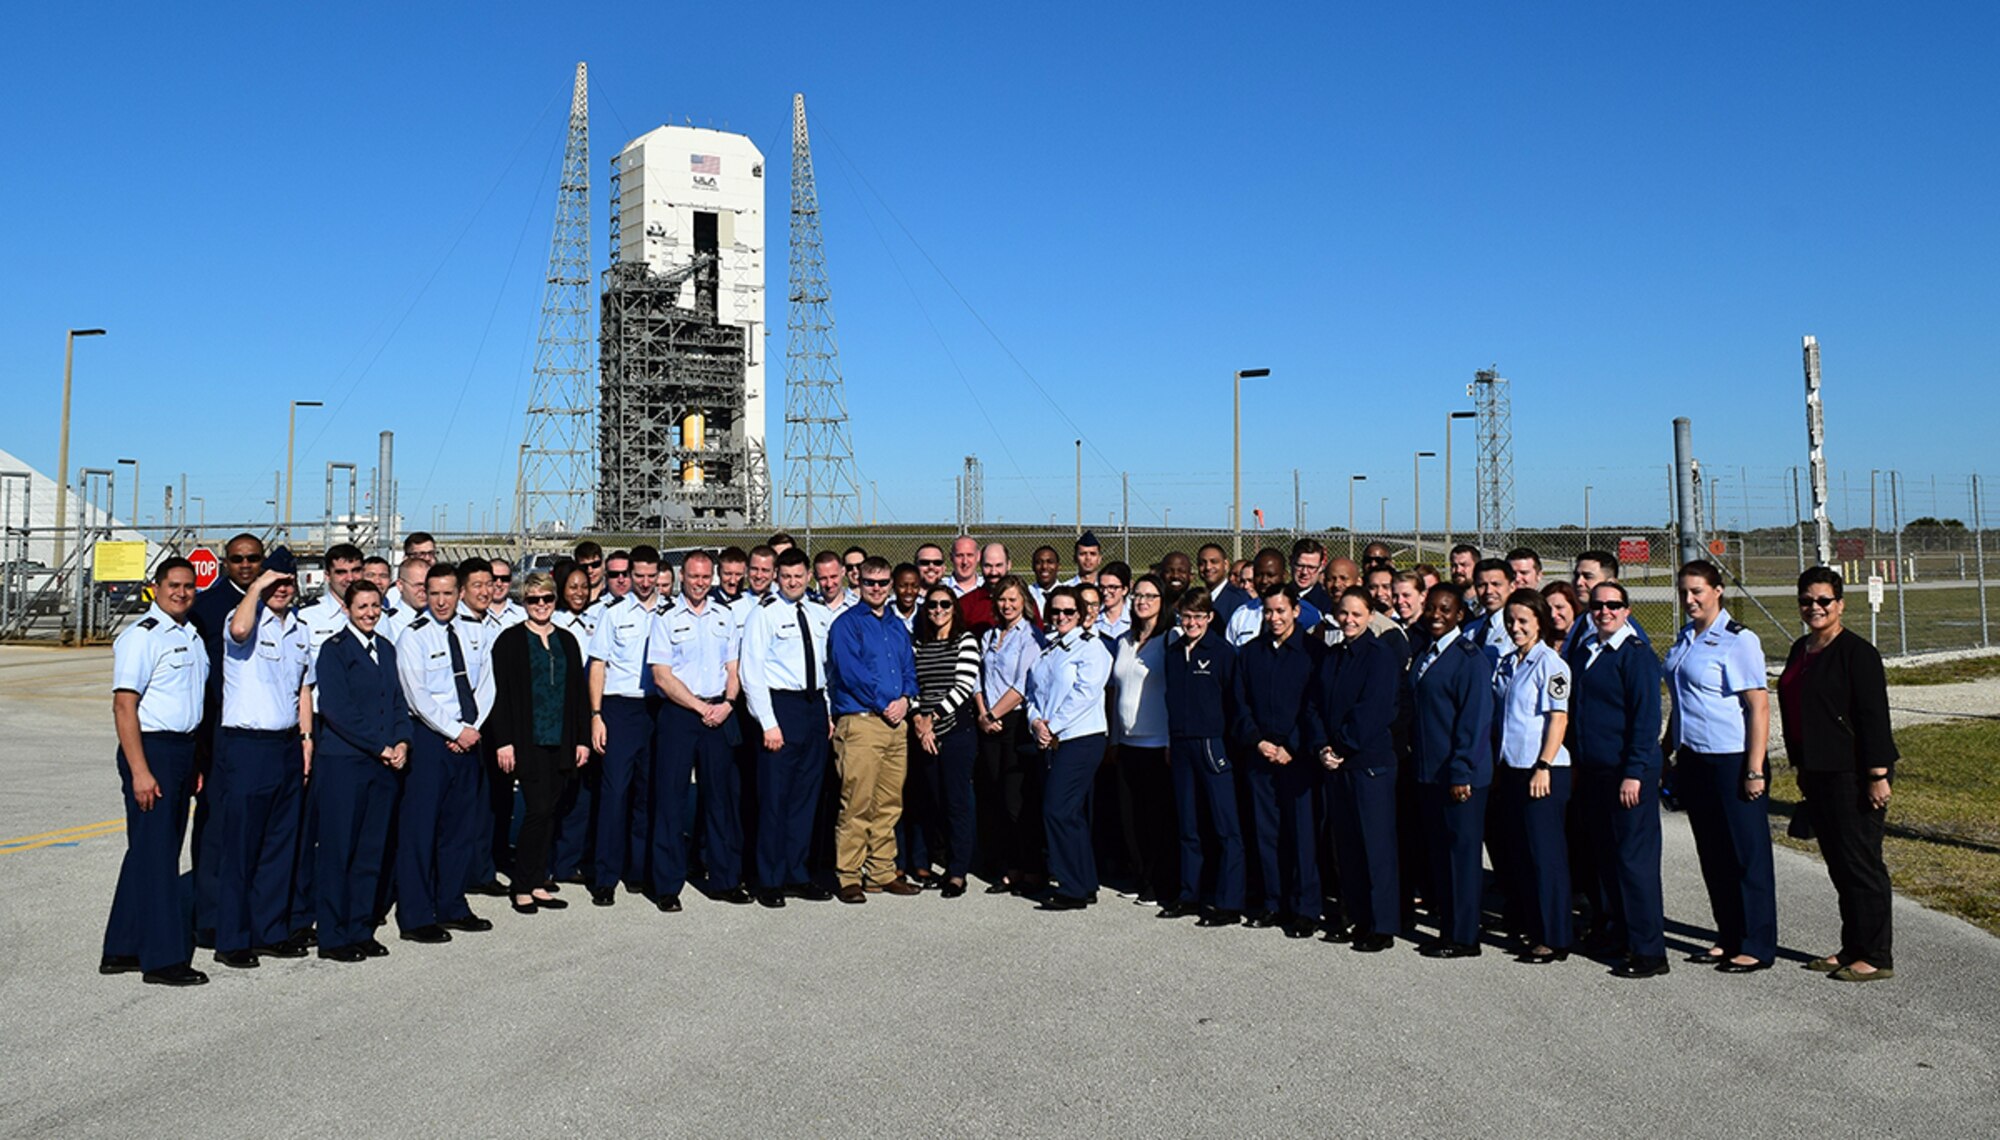 EWI Fellows at Cape Canaveral Space Launch Complex 37.  During the EWI Mid Tour Review, Fellows toured both the United Launch Alliance and Lockheed Martin Missiles & Fire Control facilities.  Senior leadership from both companies took the time to provide their perspective on partnering with industry and shared what’s made them successful. (U.S. Air Force Photo by Capt Frank Larkins)